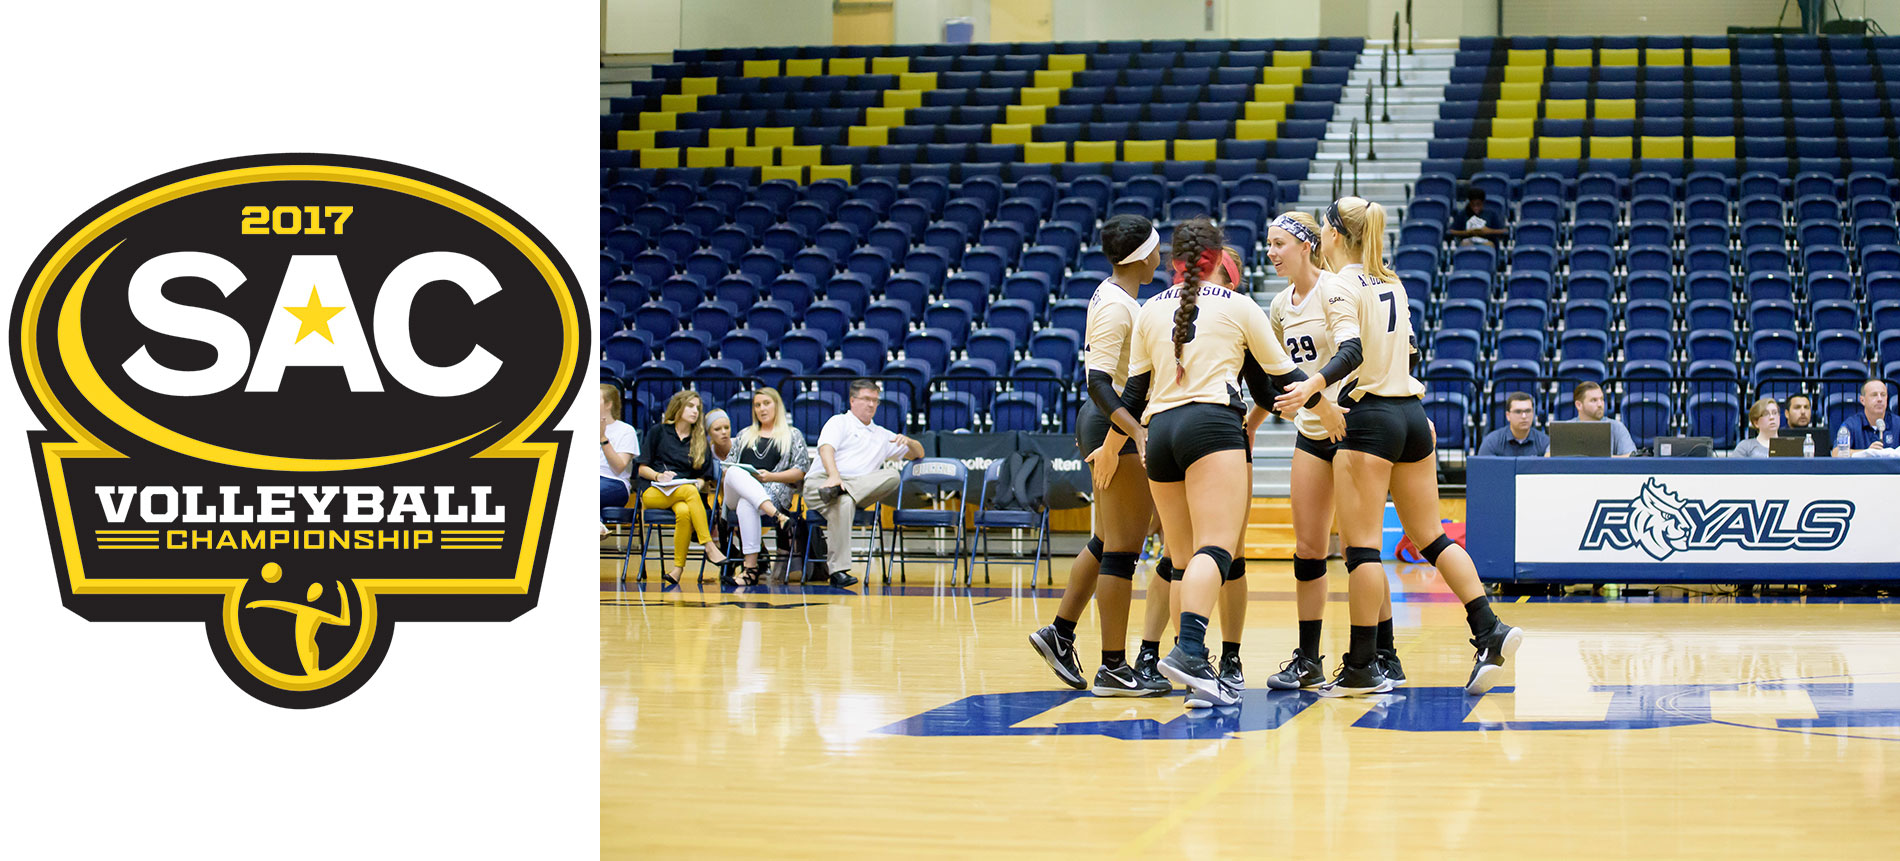 Top-Seeded Trojans Set for Sixth Straight SAC Volleyball Tournament Appearance